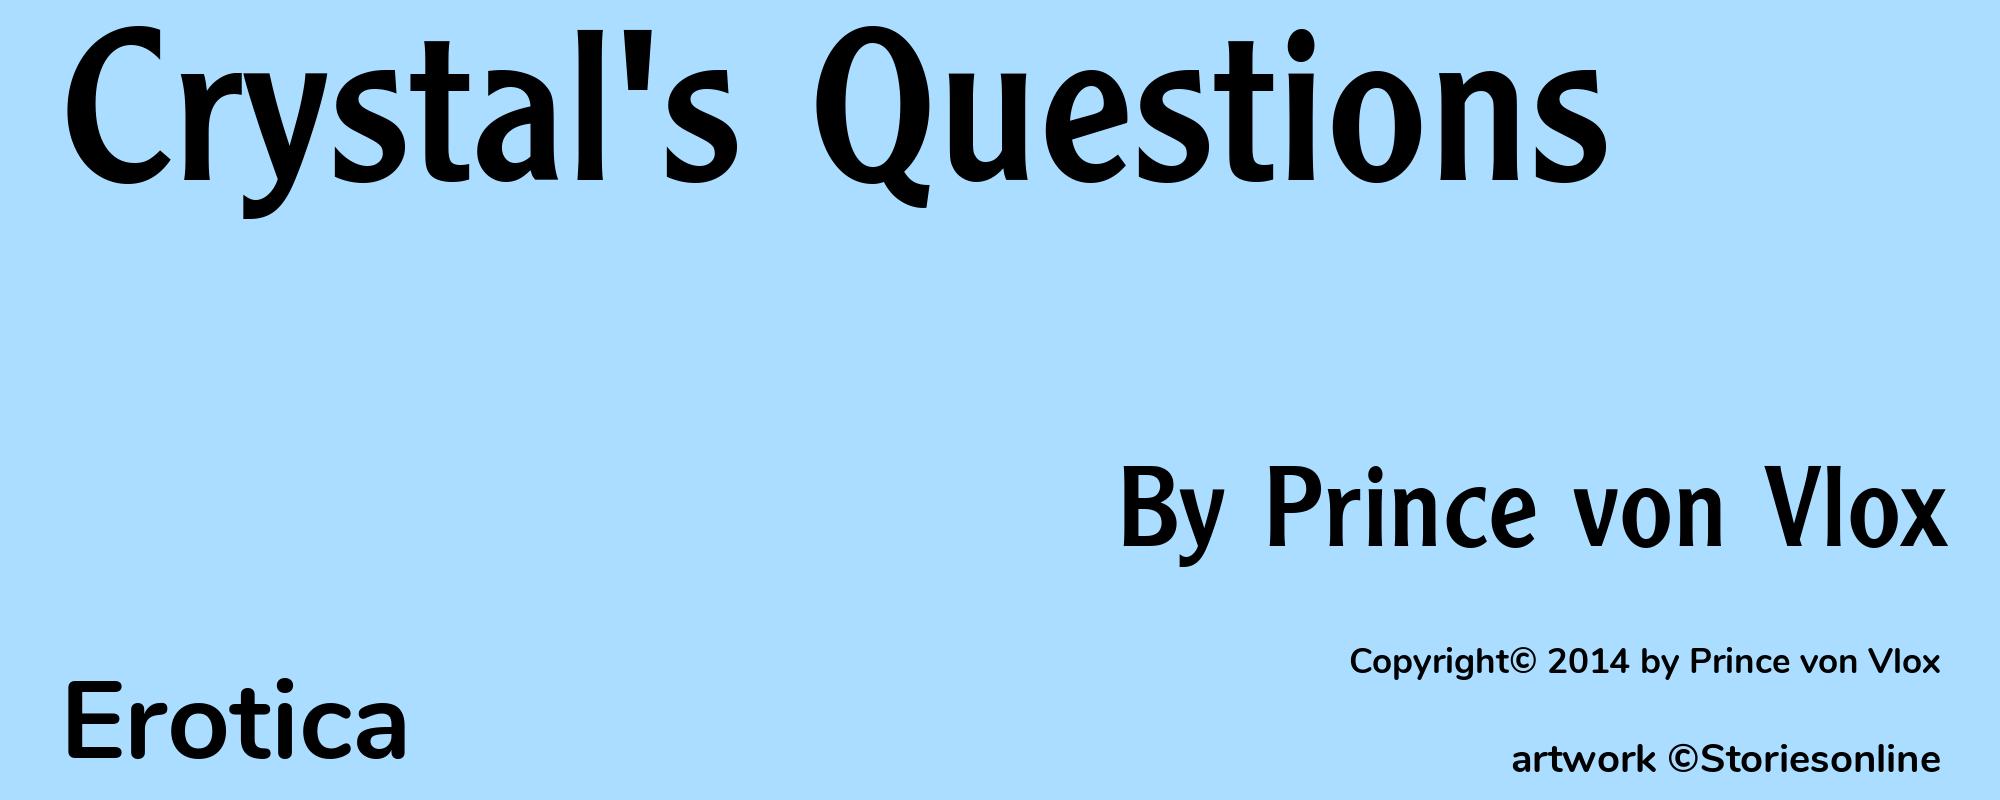 Crystal's Questions - Cover